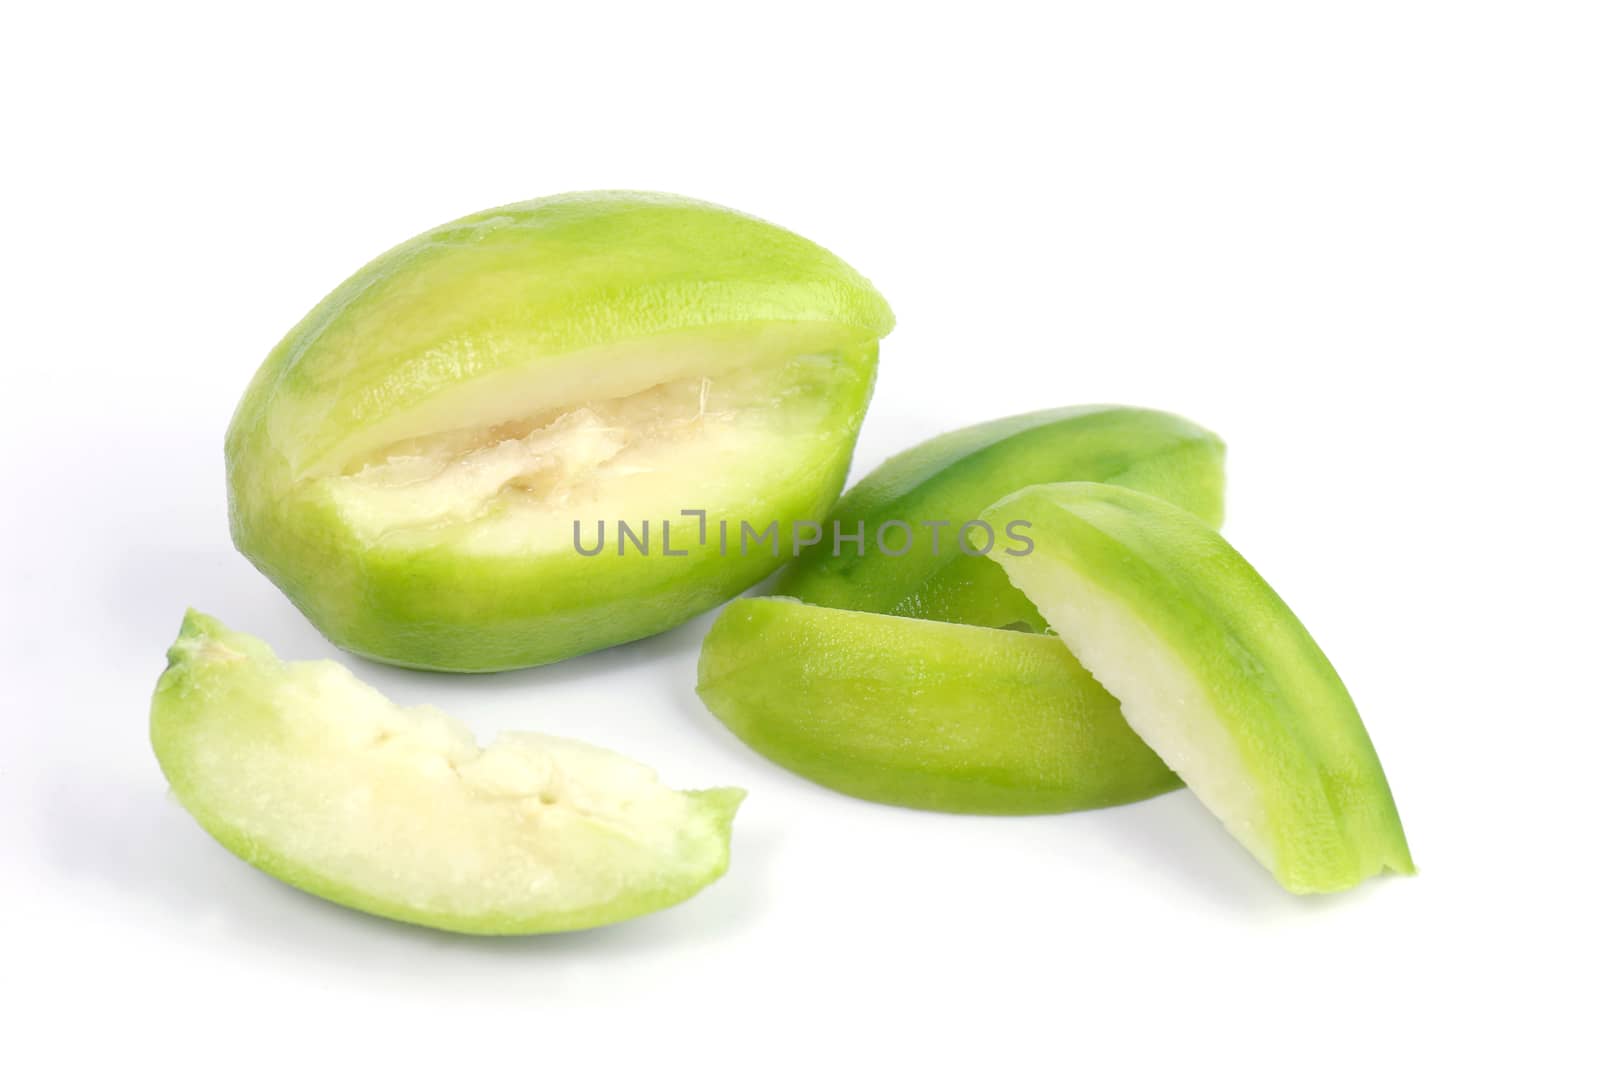 Ma Kok Nam (Thai word), Elaeocarpus hygrophilus Kurz fruits on white background, the fruits are used as foods in some Southeast Asian countries like Thailand